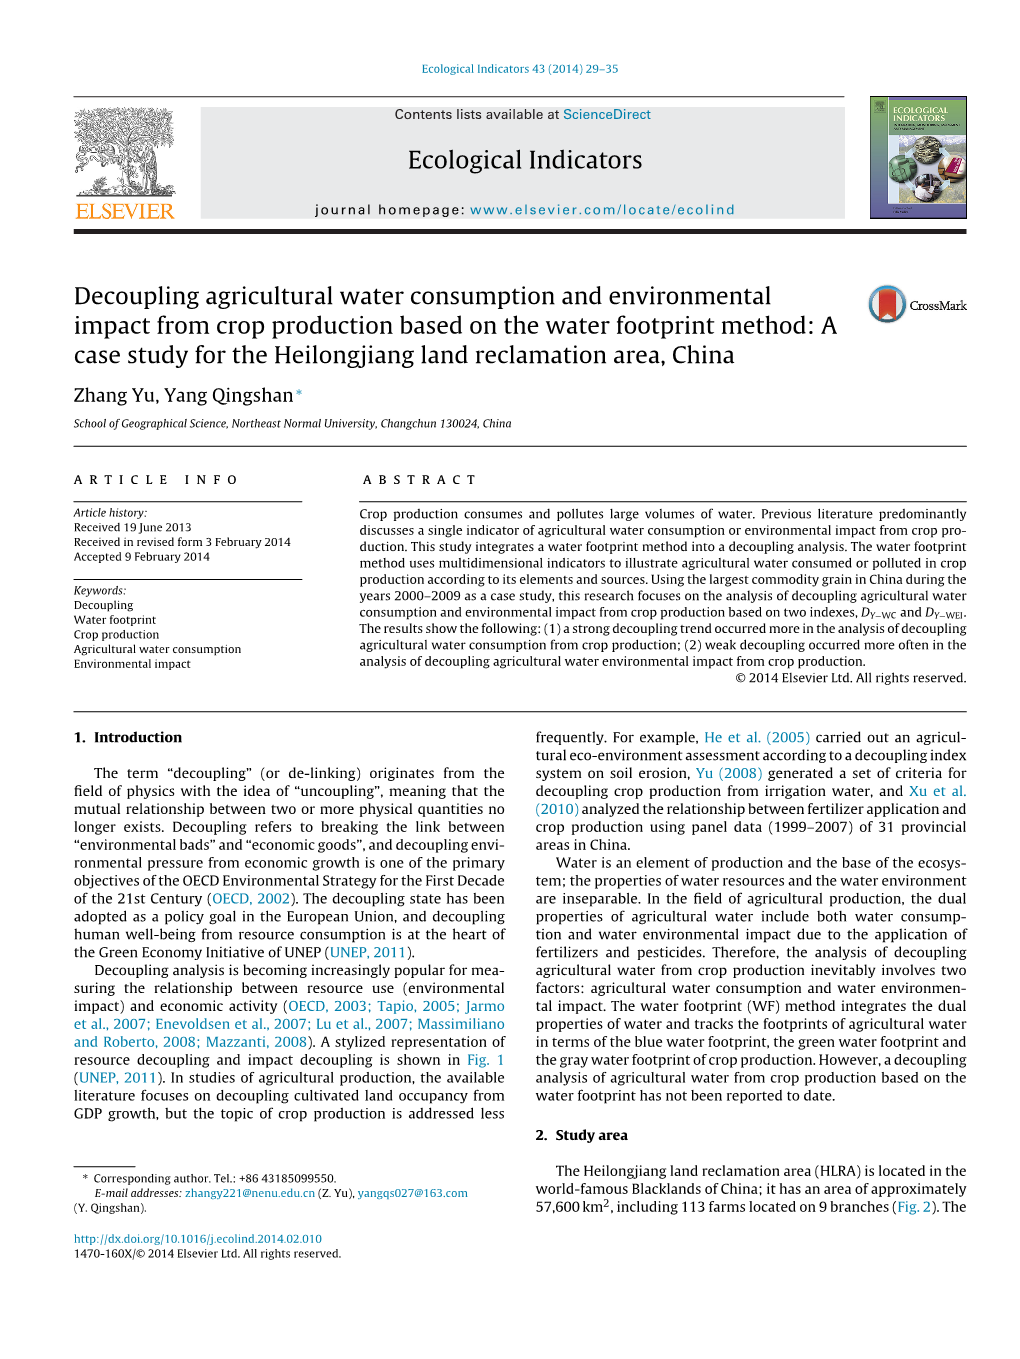 Decoupling Agricultural Water Consumption and Environmental